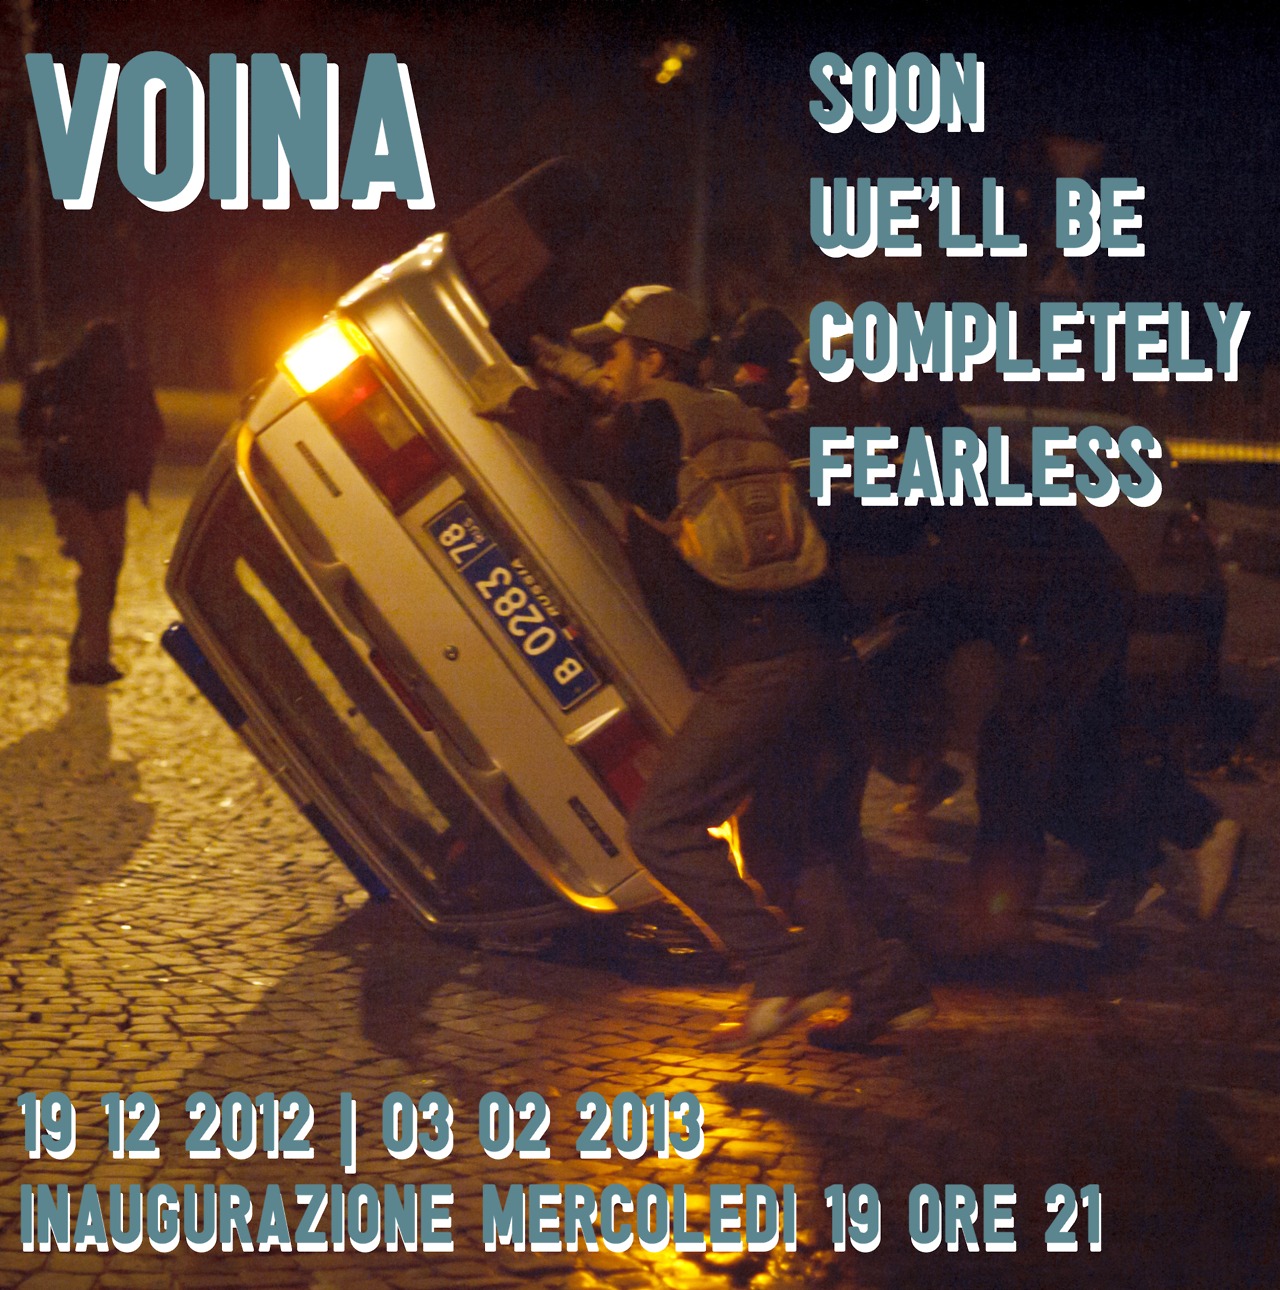 Voina - Soon we'll be completely fearless